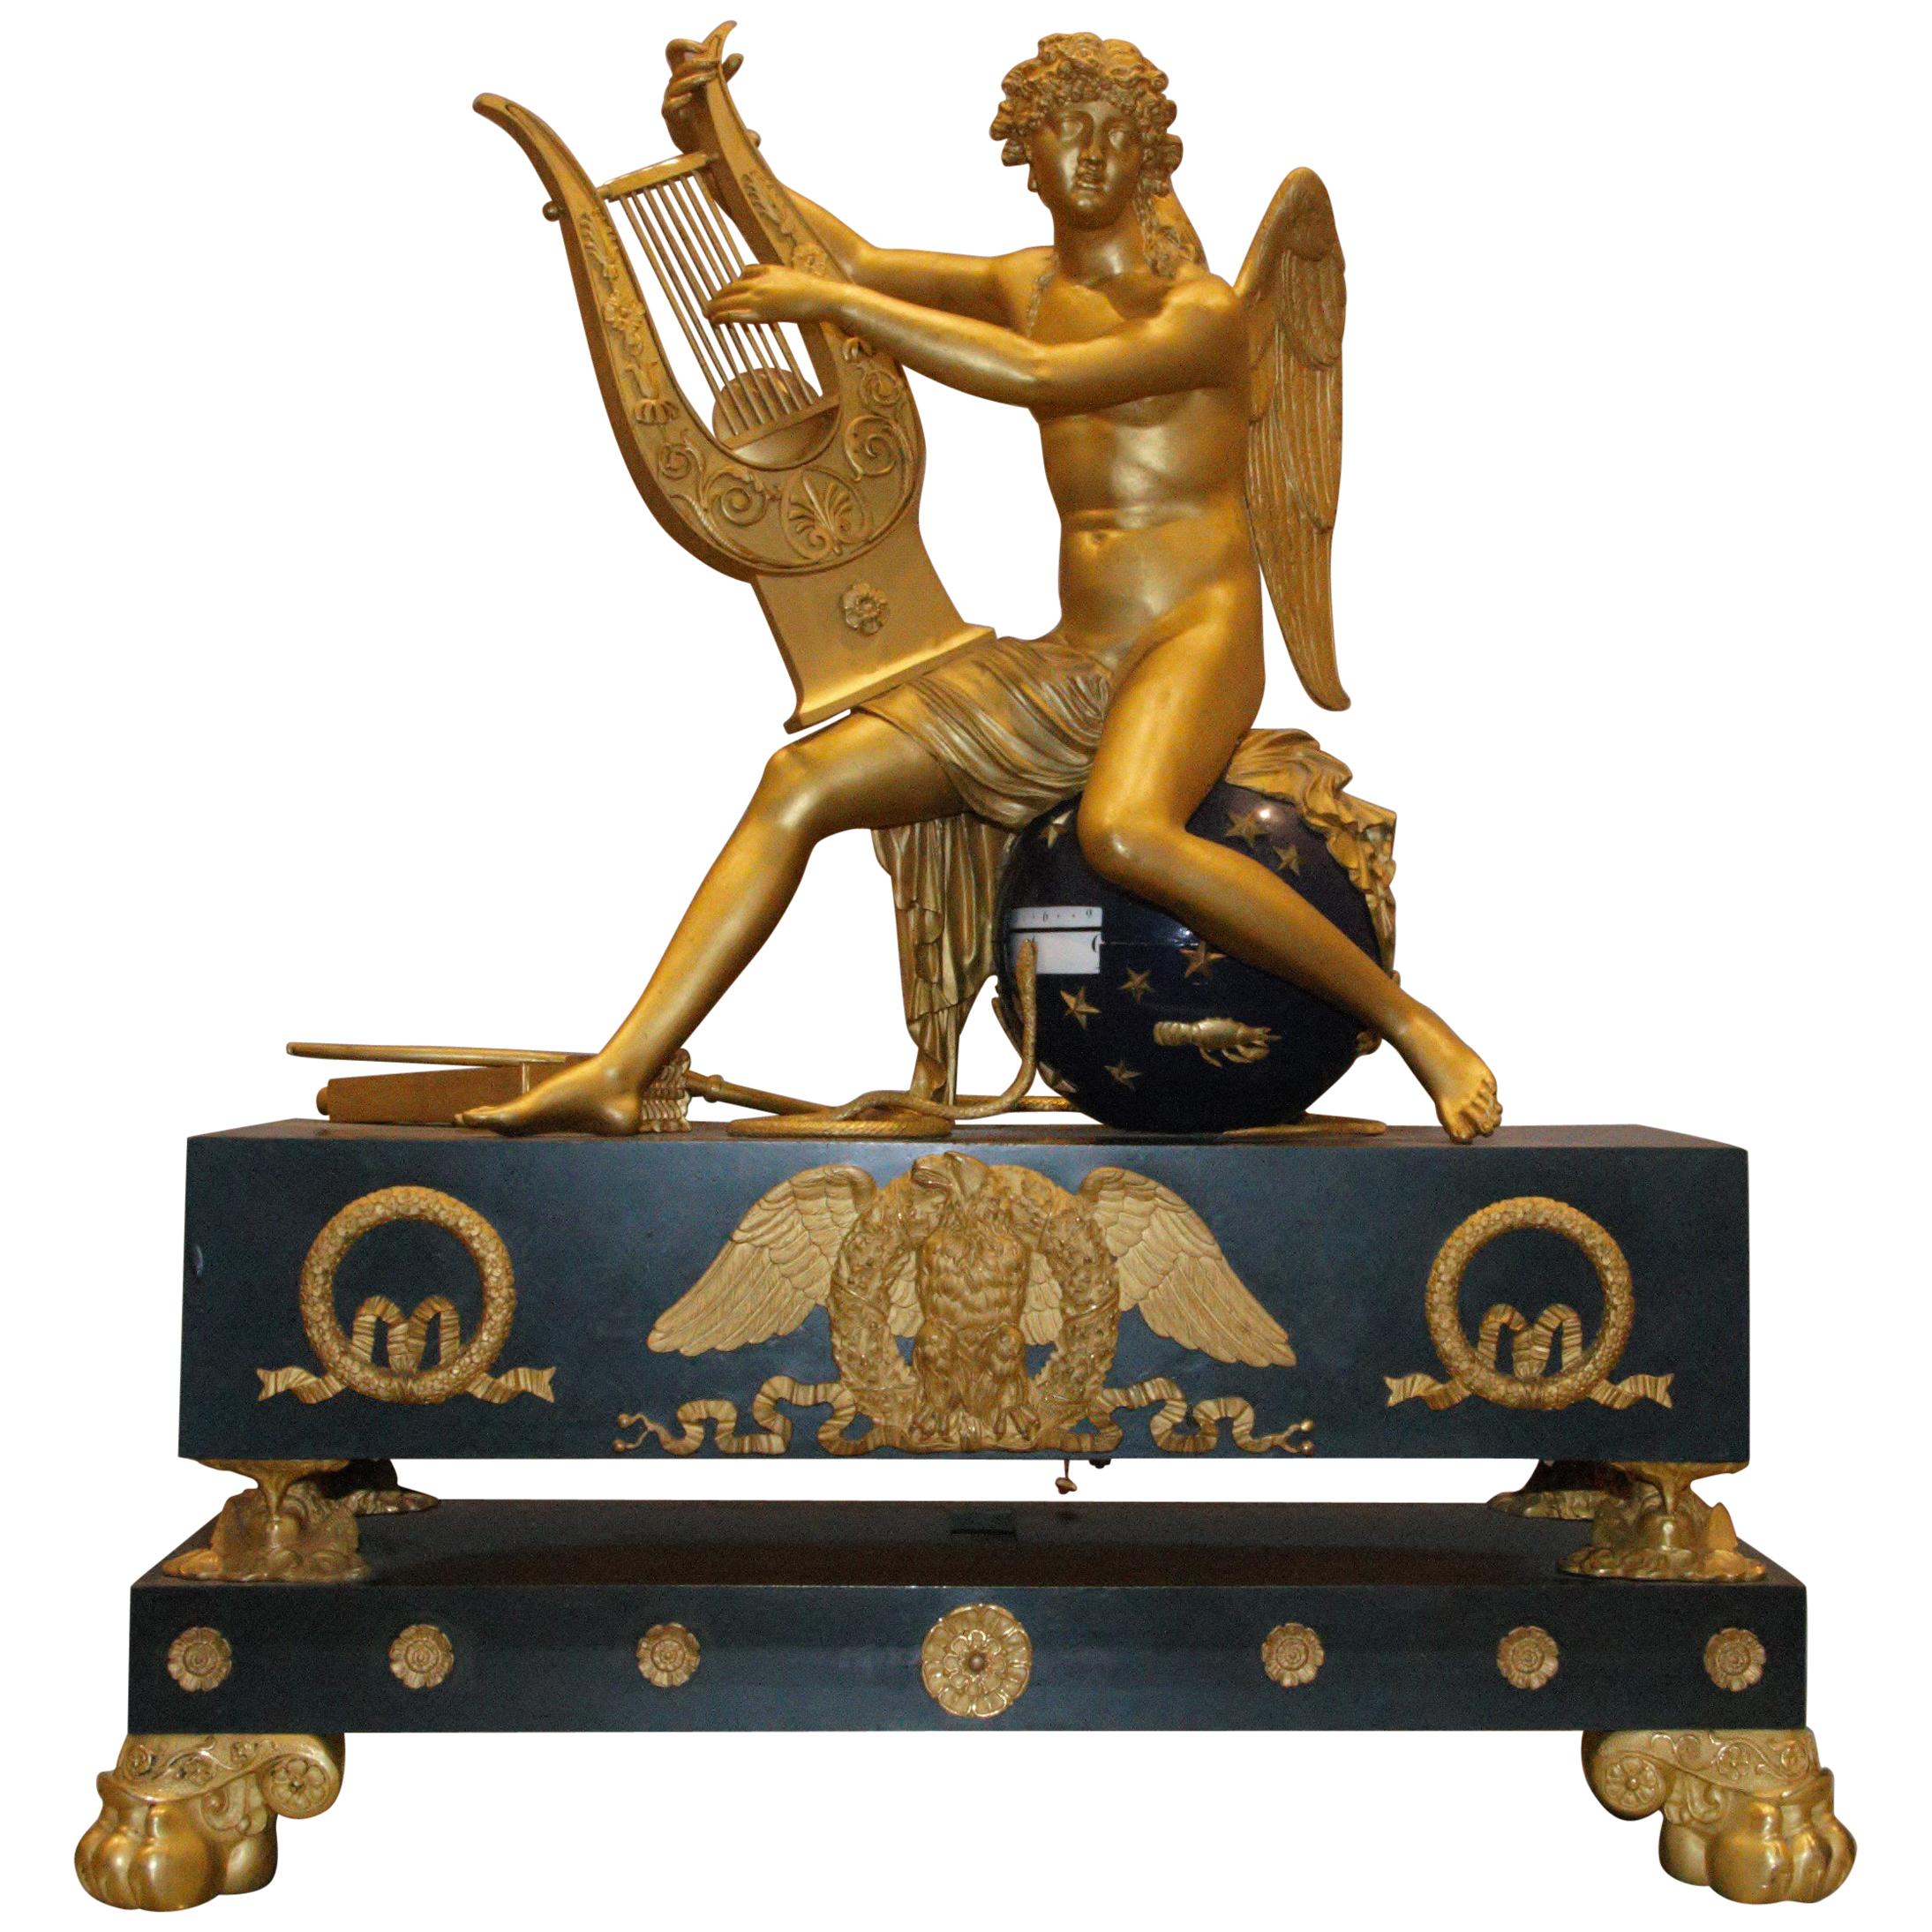 French Empire Ormolu and Bronze Sculptural "Cercles Tournants" Mantel Clock For Sale